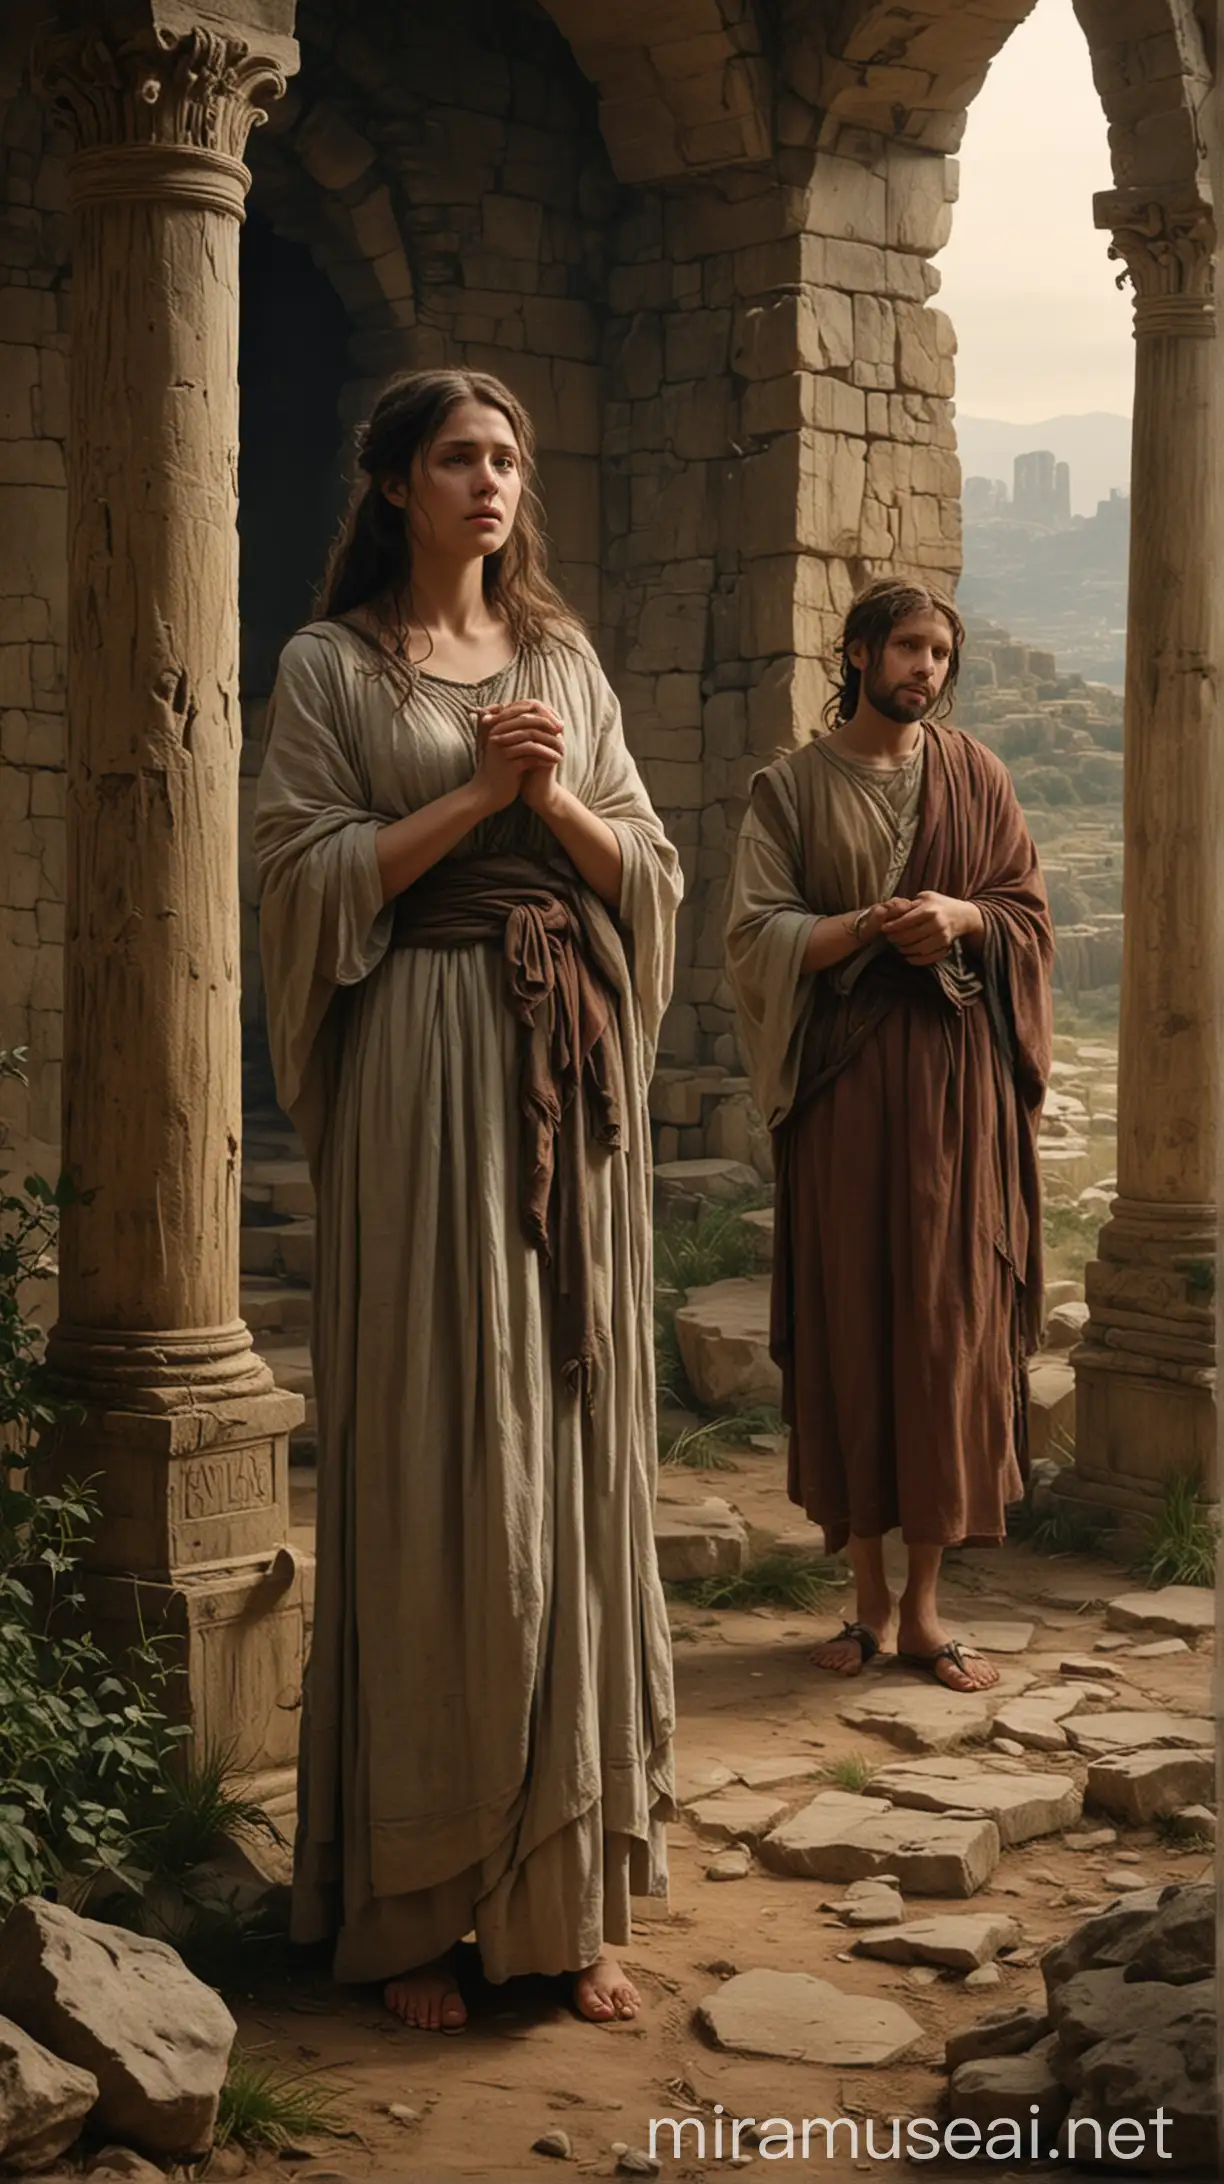 Lot and Younger Daughter in a Biblical Moment of Controversy